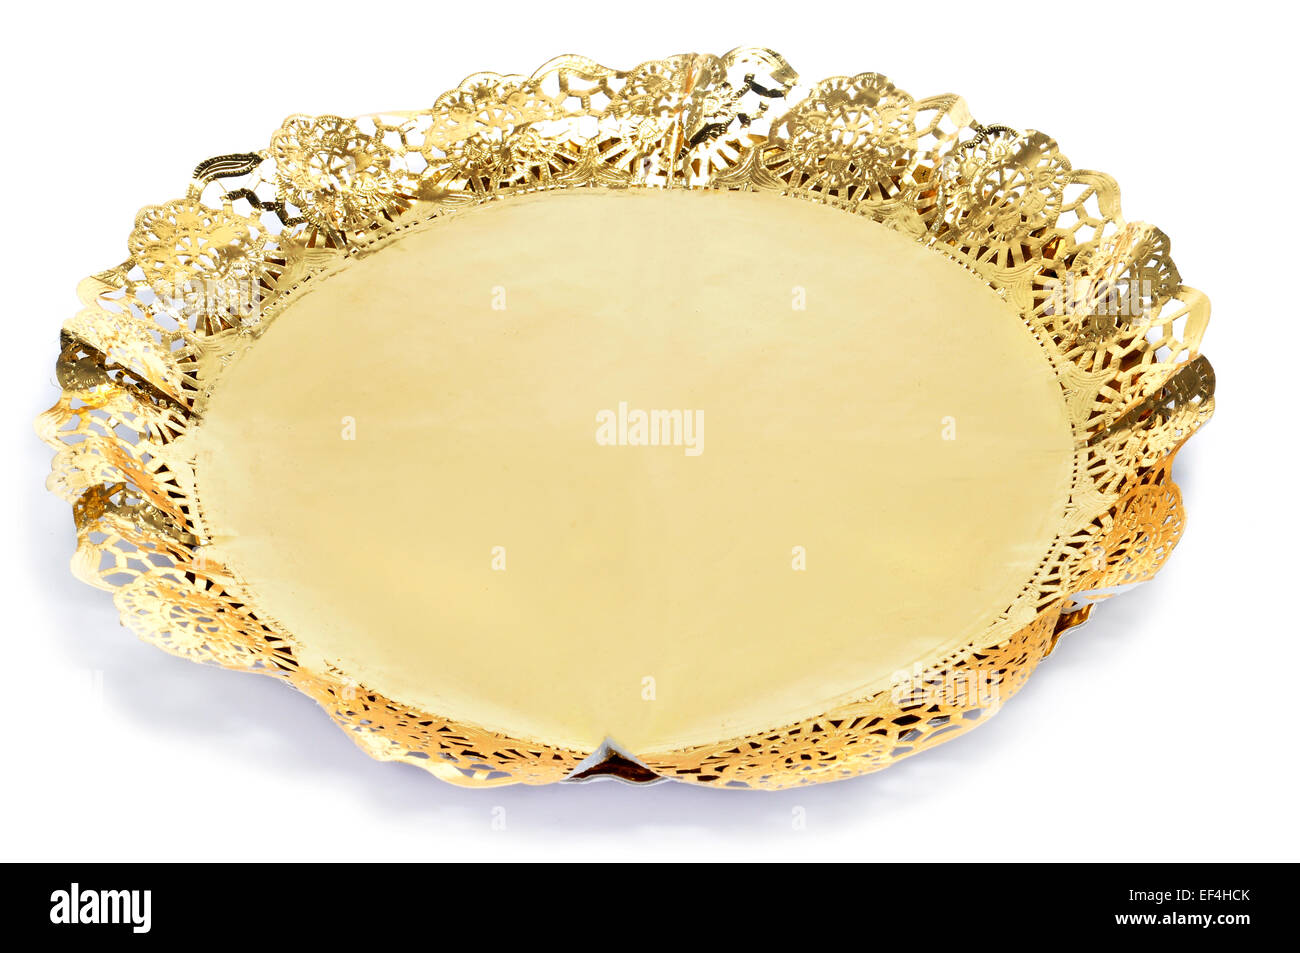 a golden paper lace doily on a cake board for display cakes on a white background Stock Photo